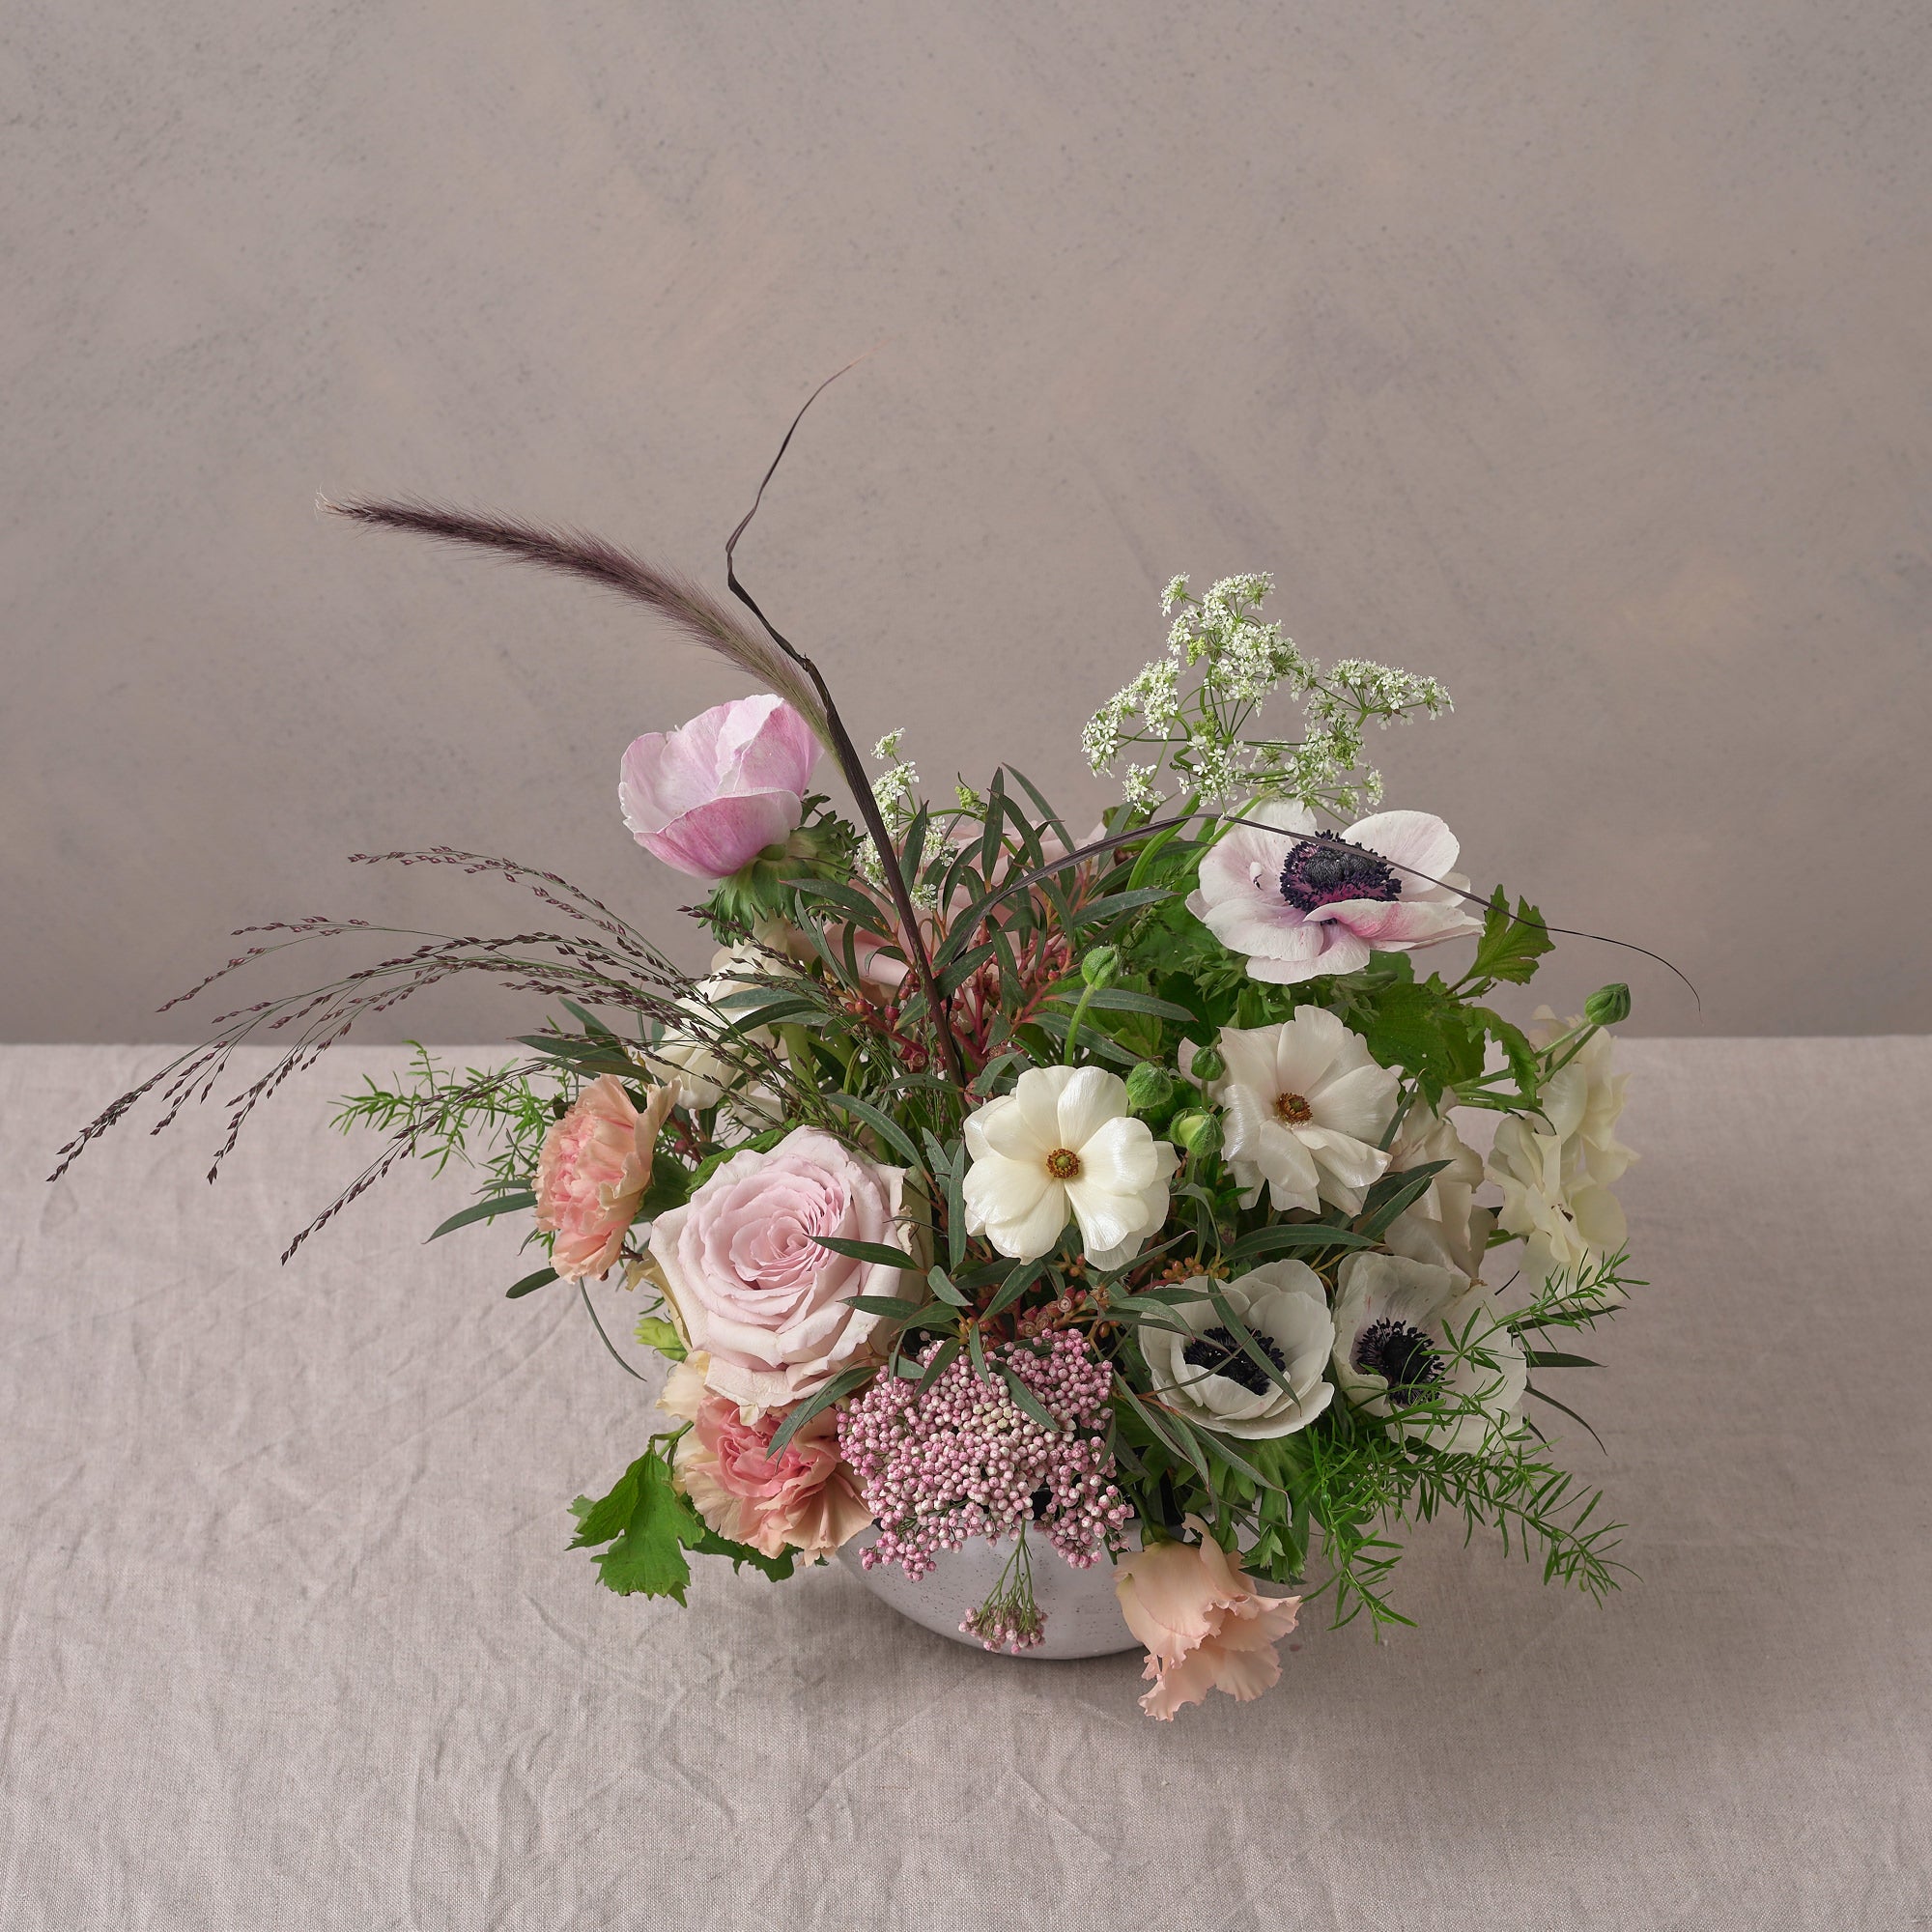 english country garden style flower bowl arrangement for weddings and events by Botanique Workshop